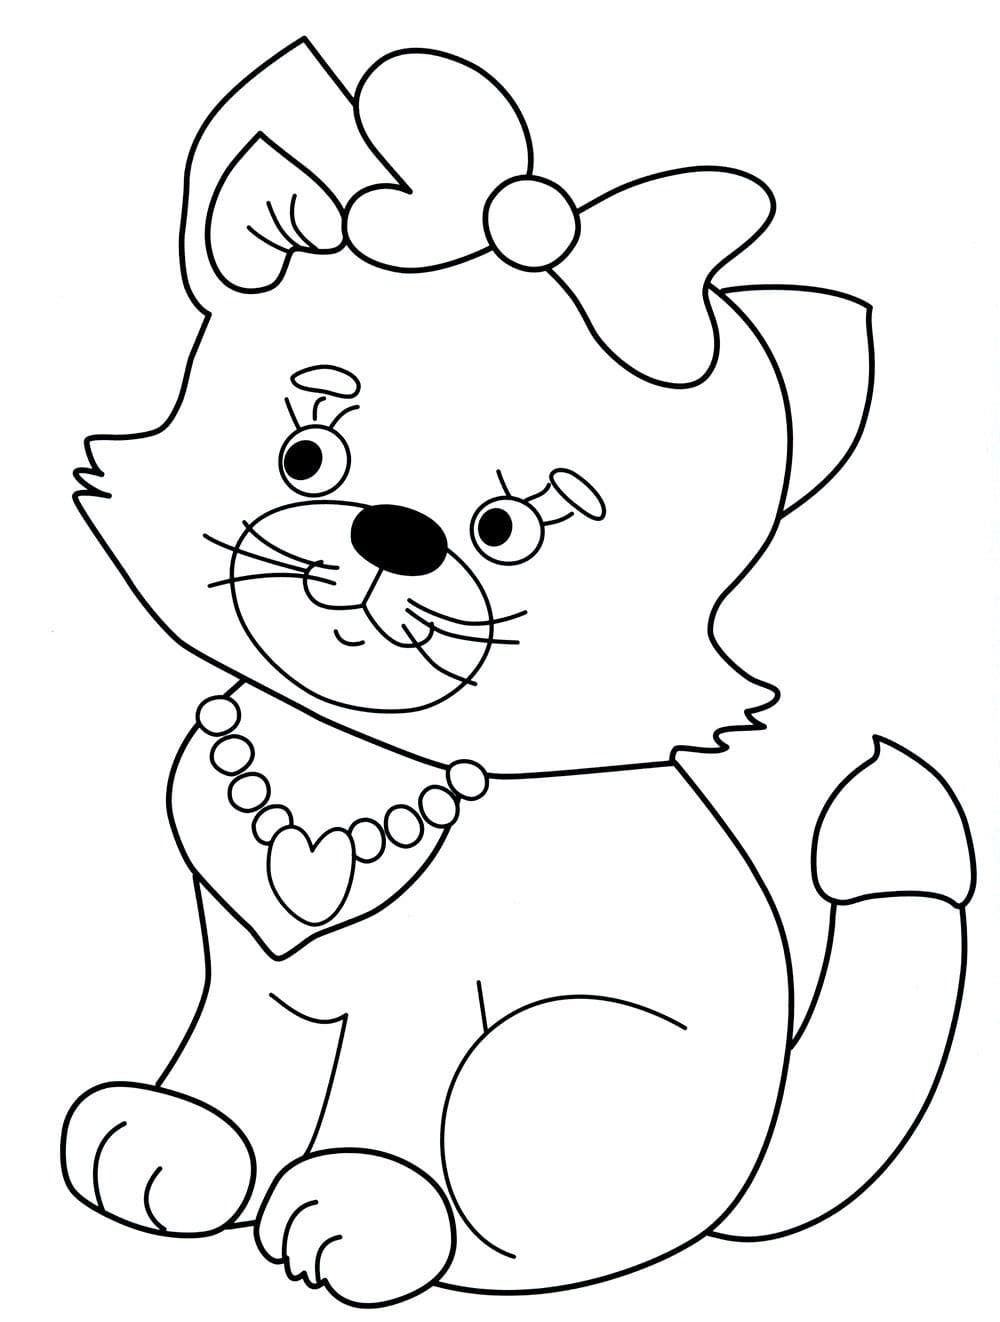 Coloring Pages for Kids 5 Years Old